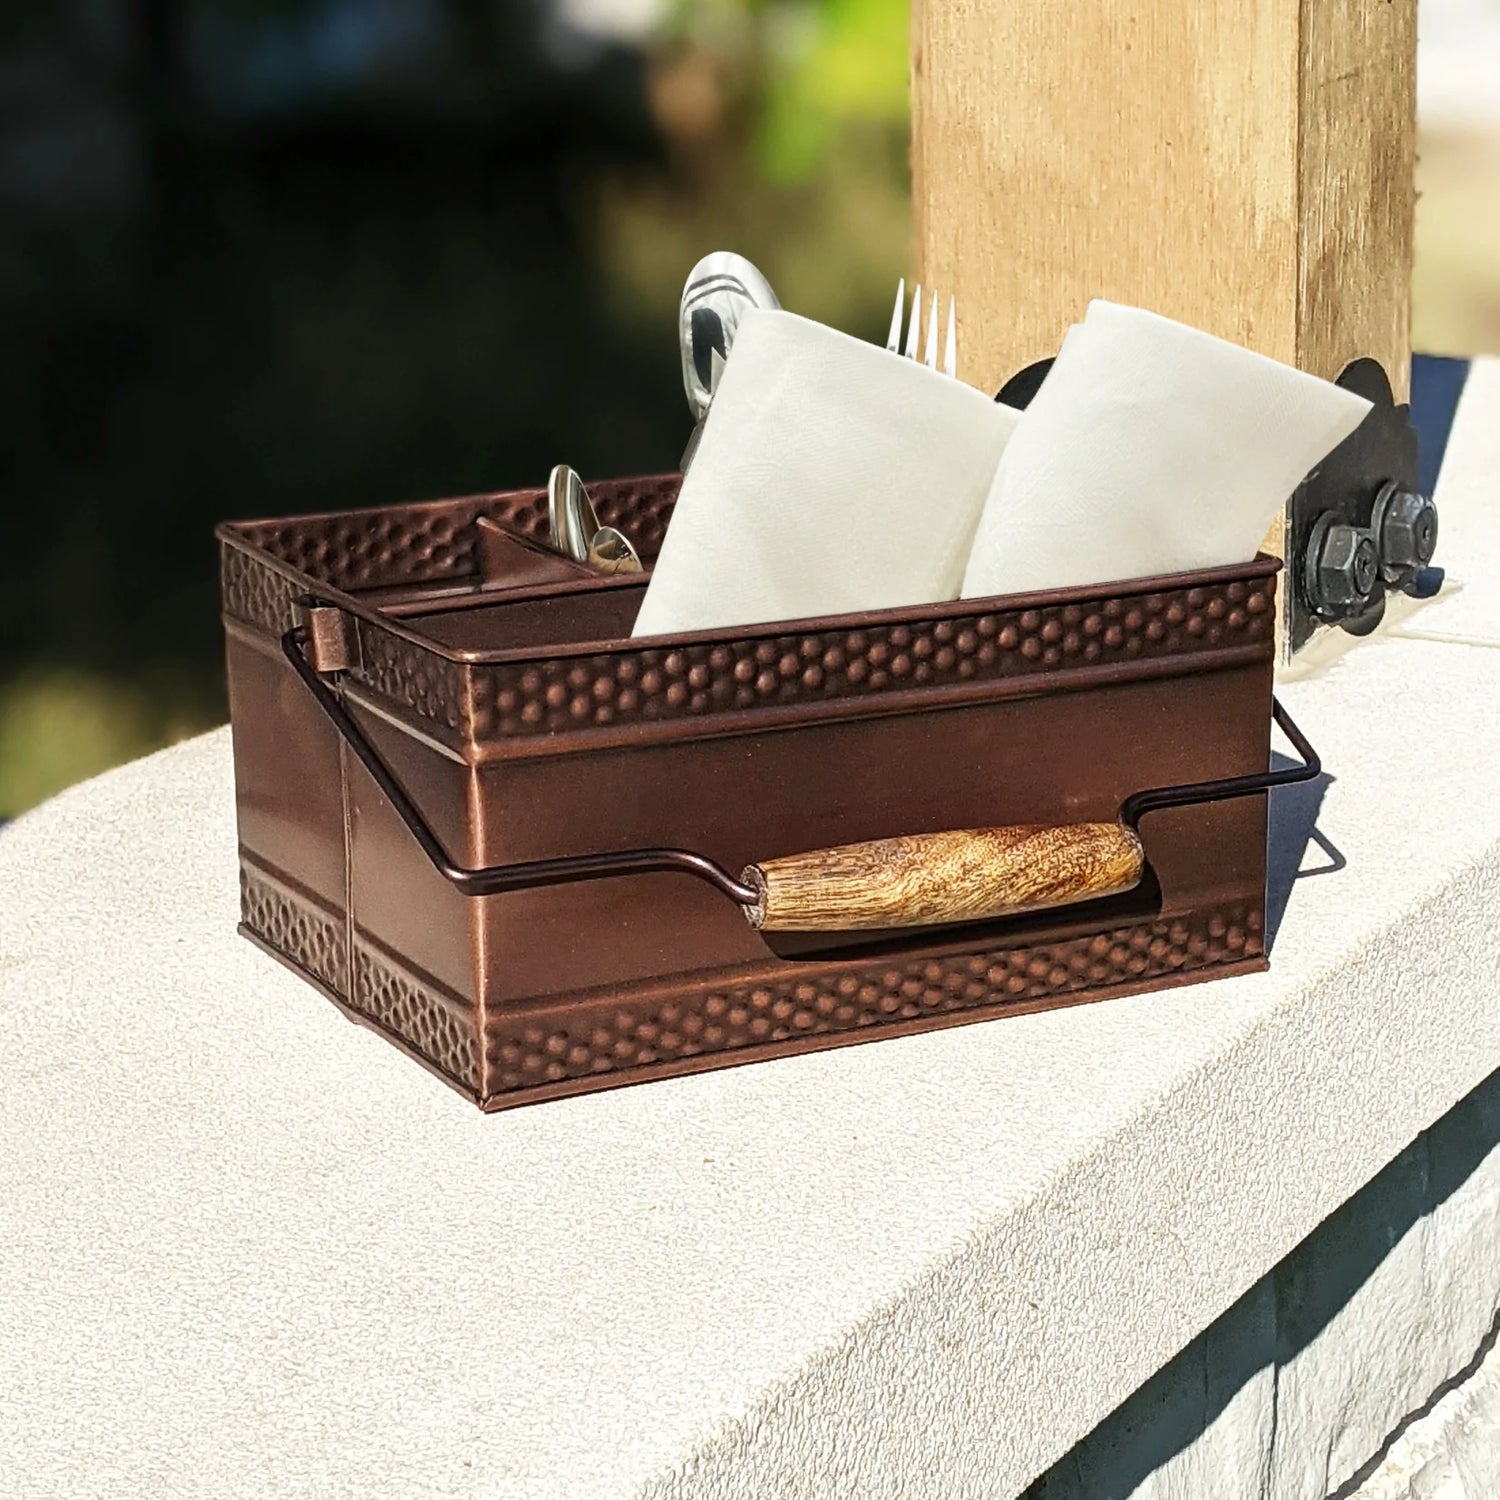 Condiment holder for condiments, napkins, or utensils when hosting a party or event.  Organizes and easily transports party essentials indoors to outdoors, from kitchen, to bar, to the patio.  Copper in color with hammered exterior.